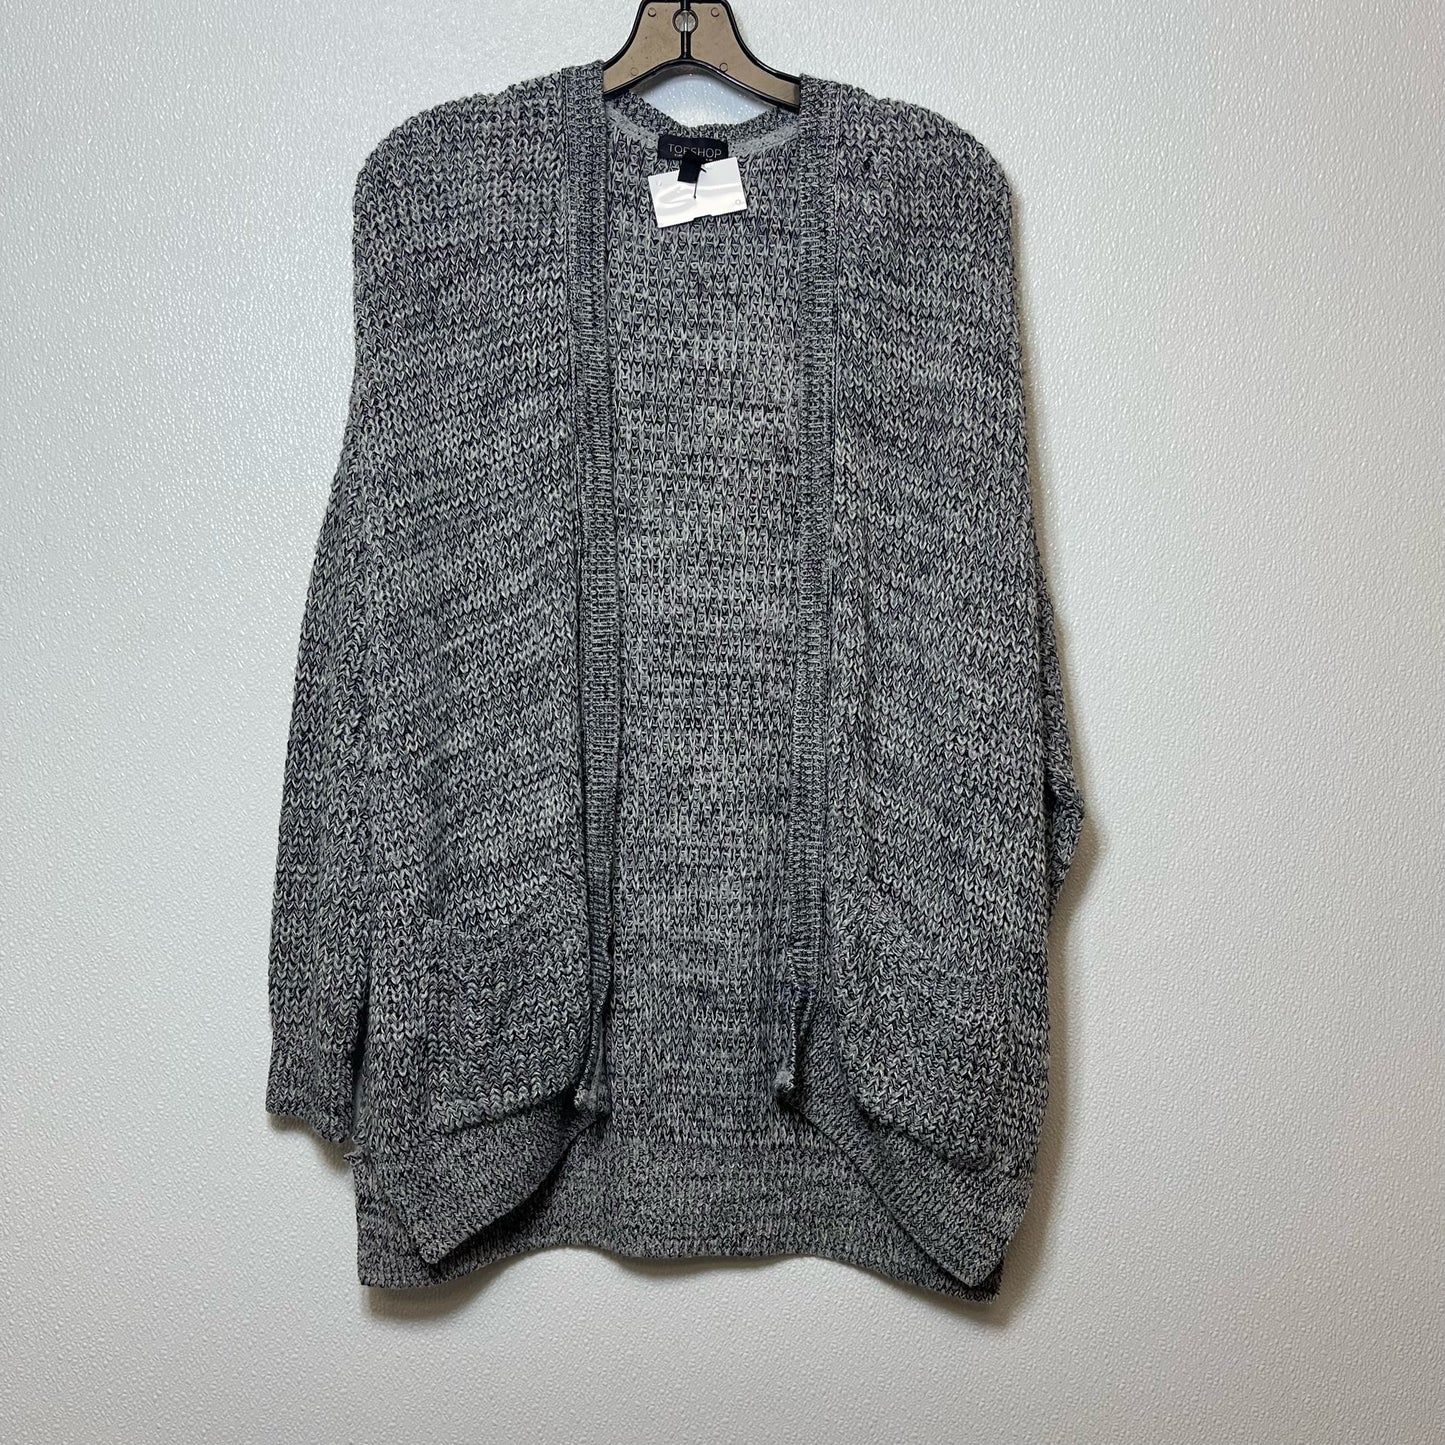 Cardigan By Top Shop  Size: 8